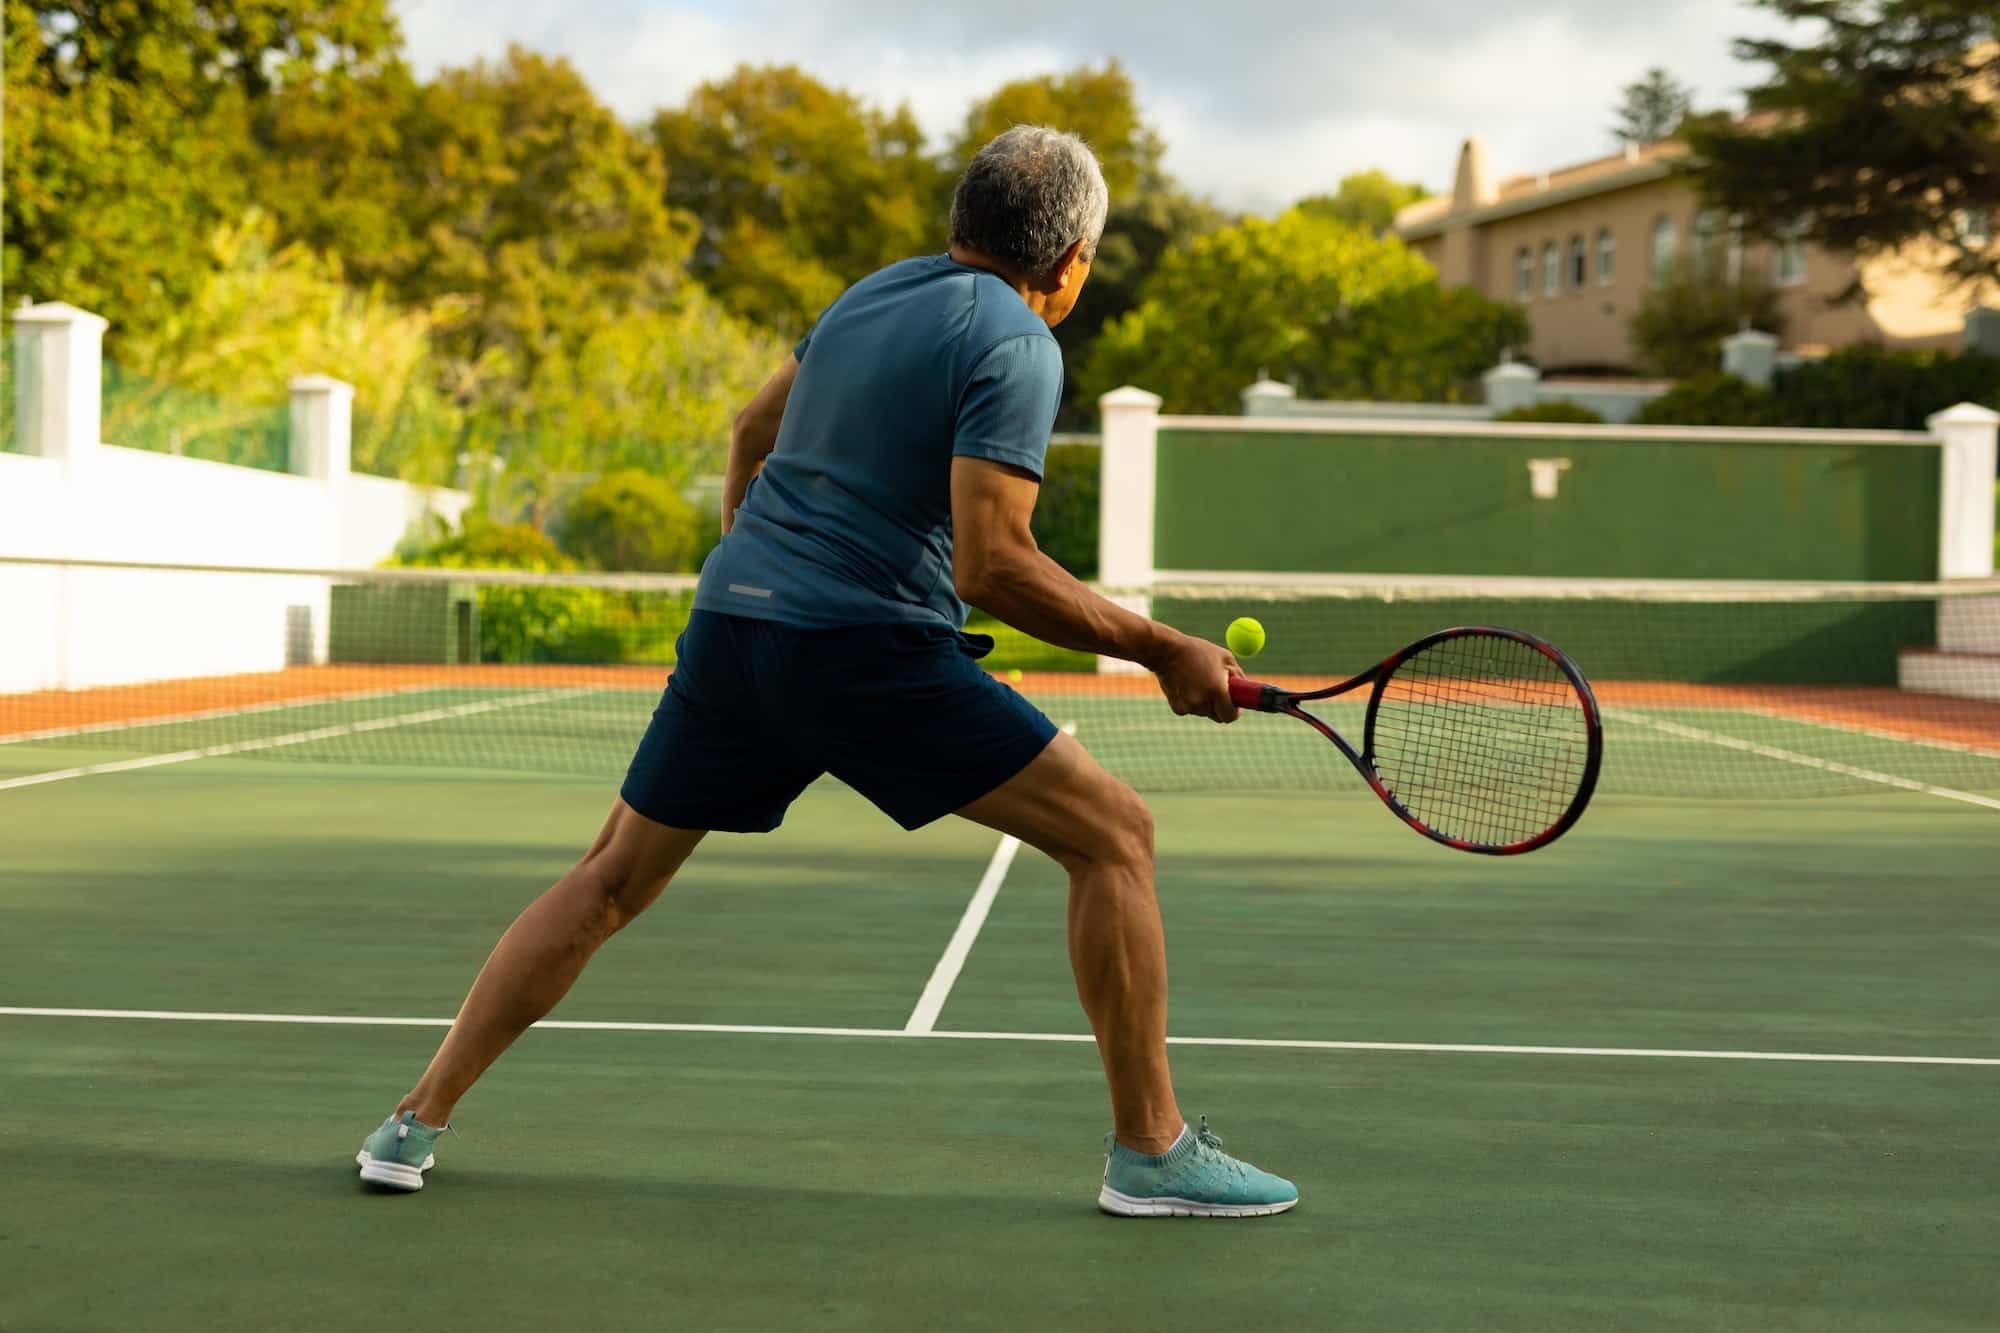 Full length of active biracial senior man holding racket and playing tennis at tennis court